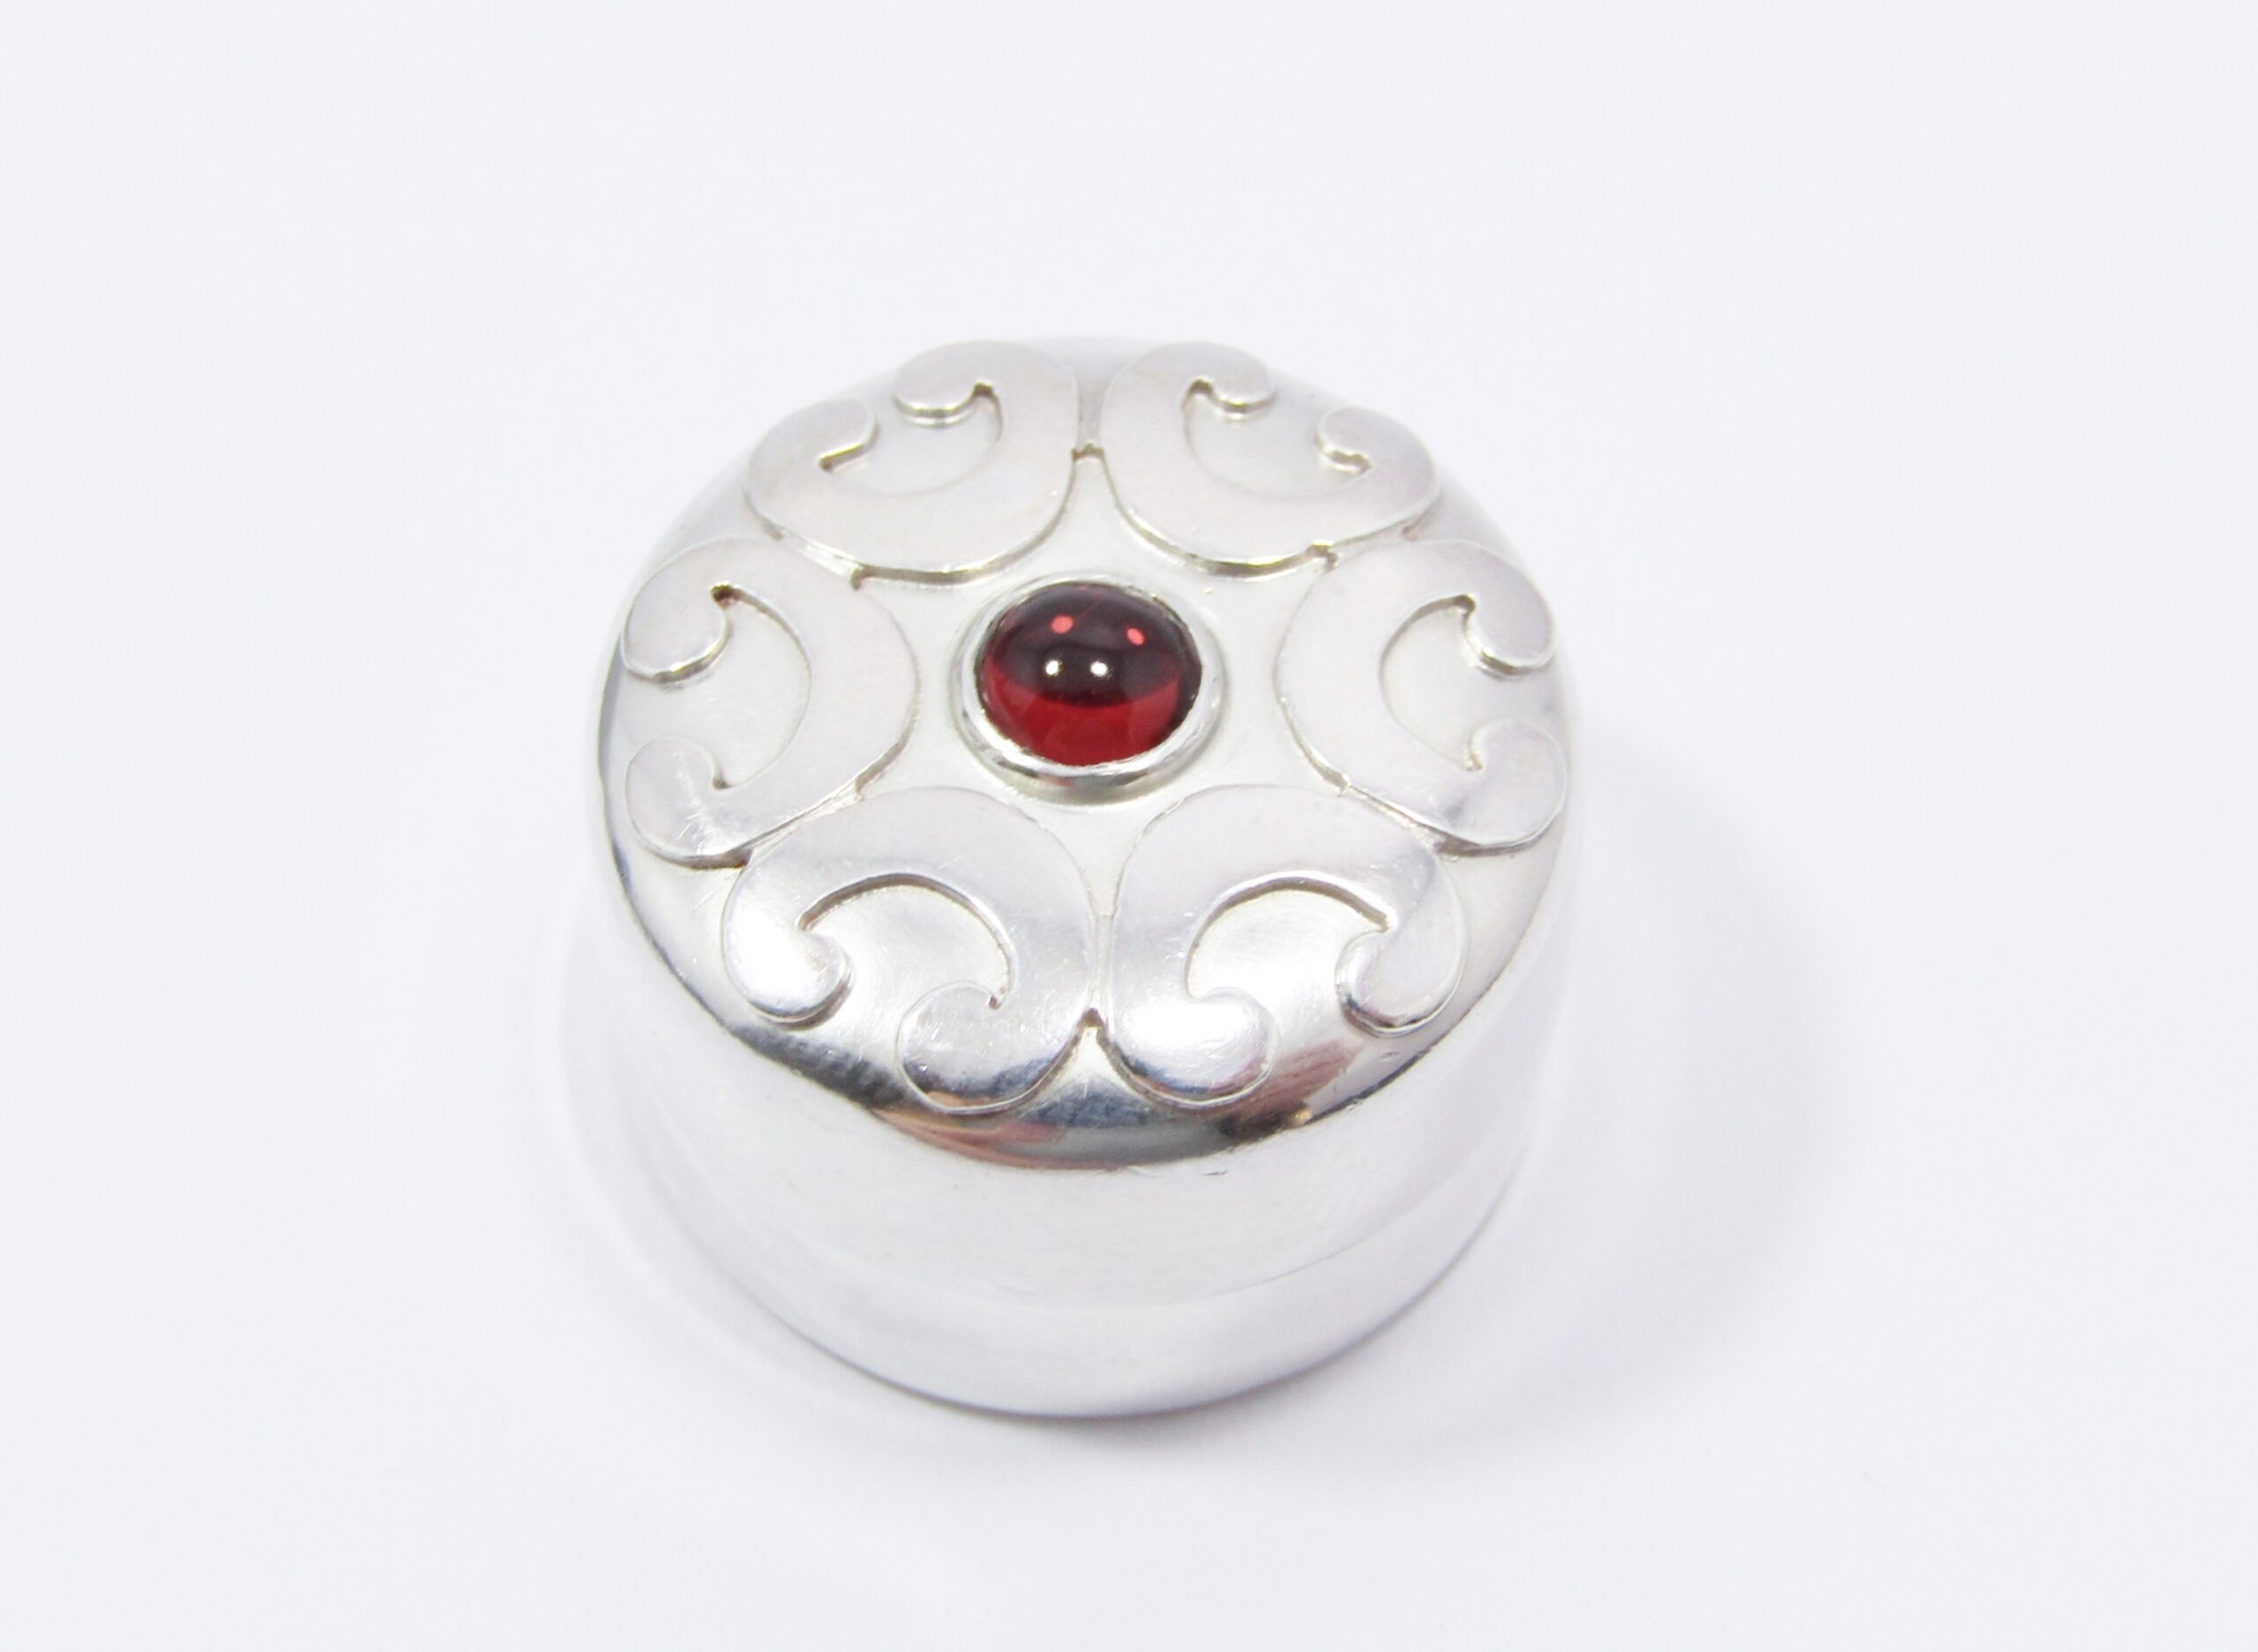 A Lovely Round Pill Box With a Garnet Stone in Sterling Silver.